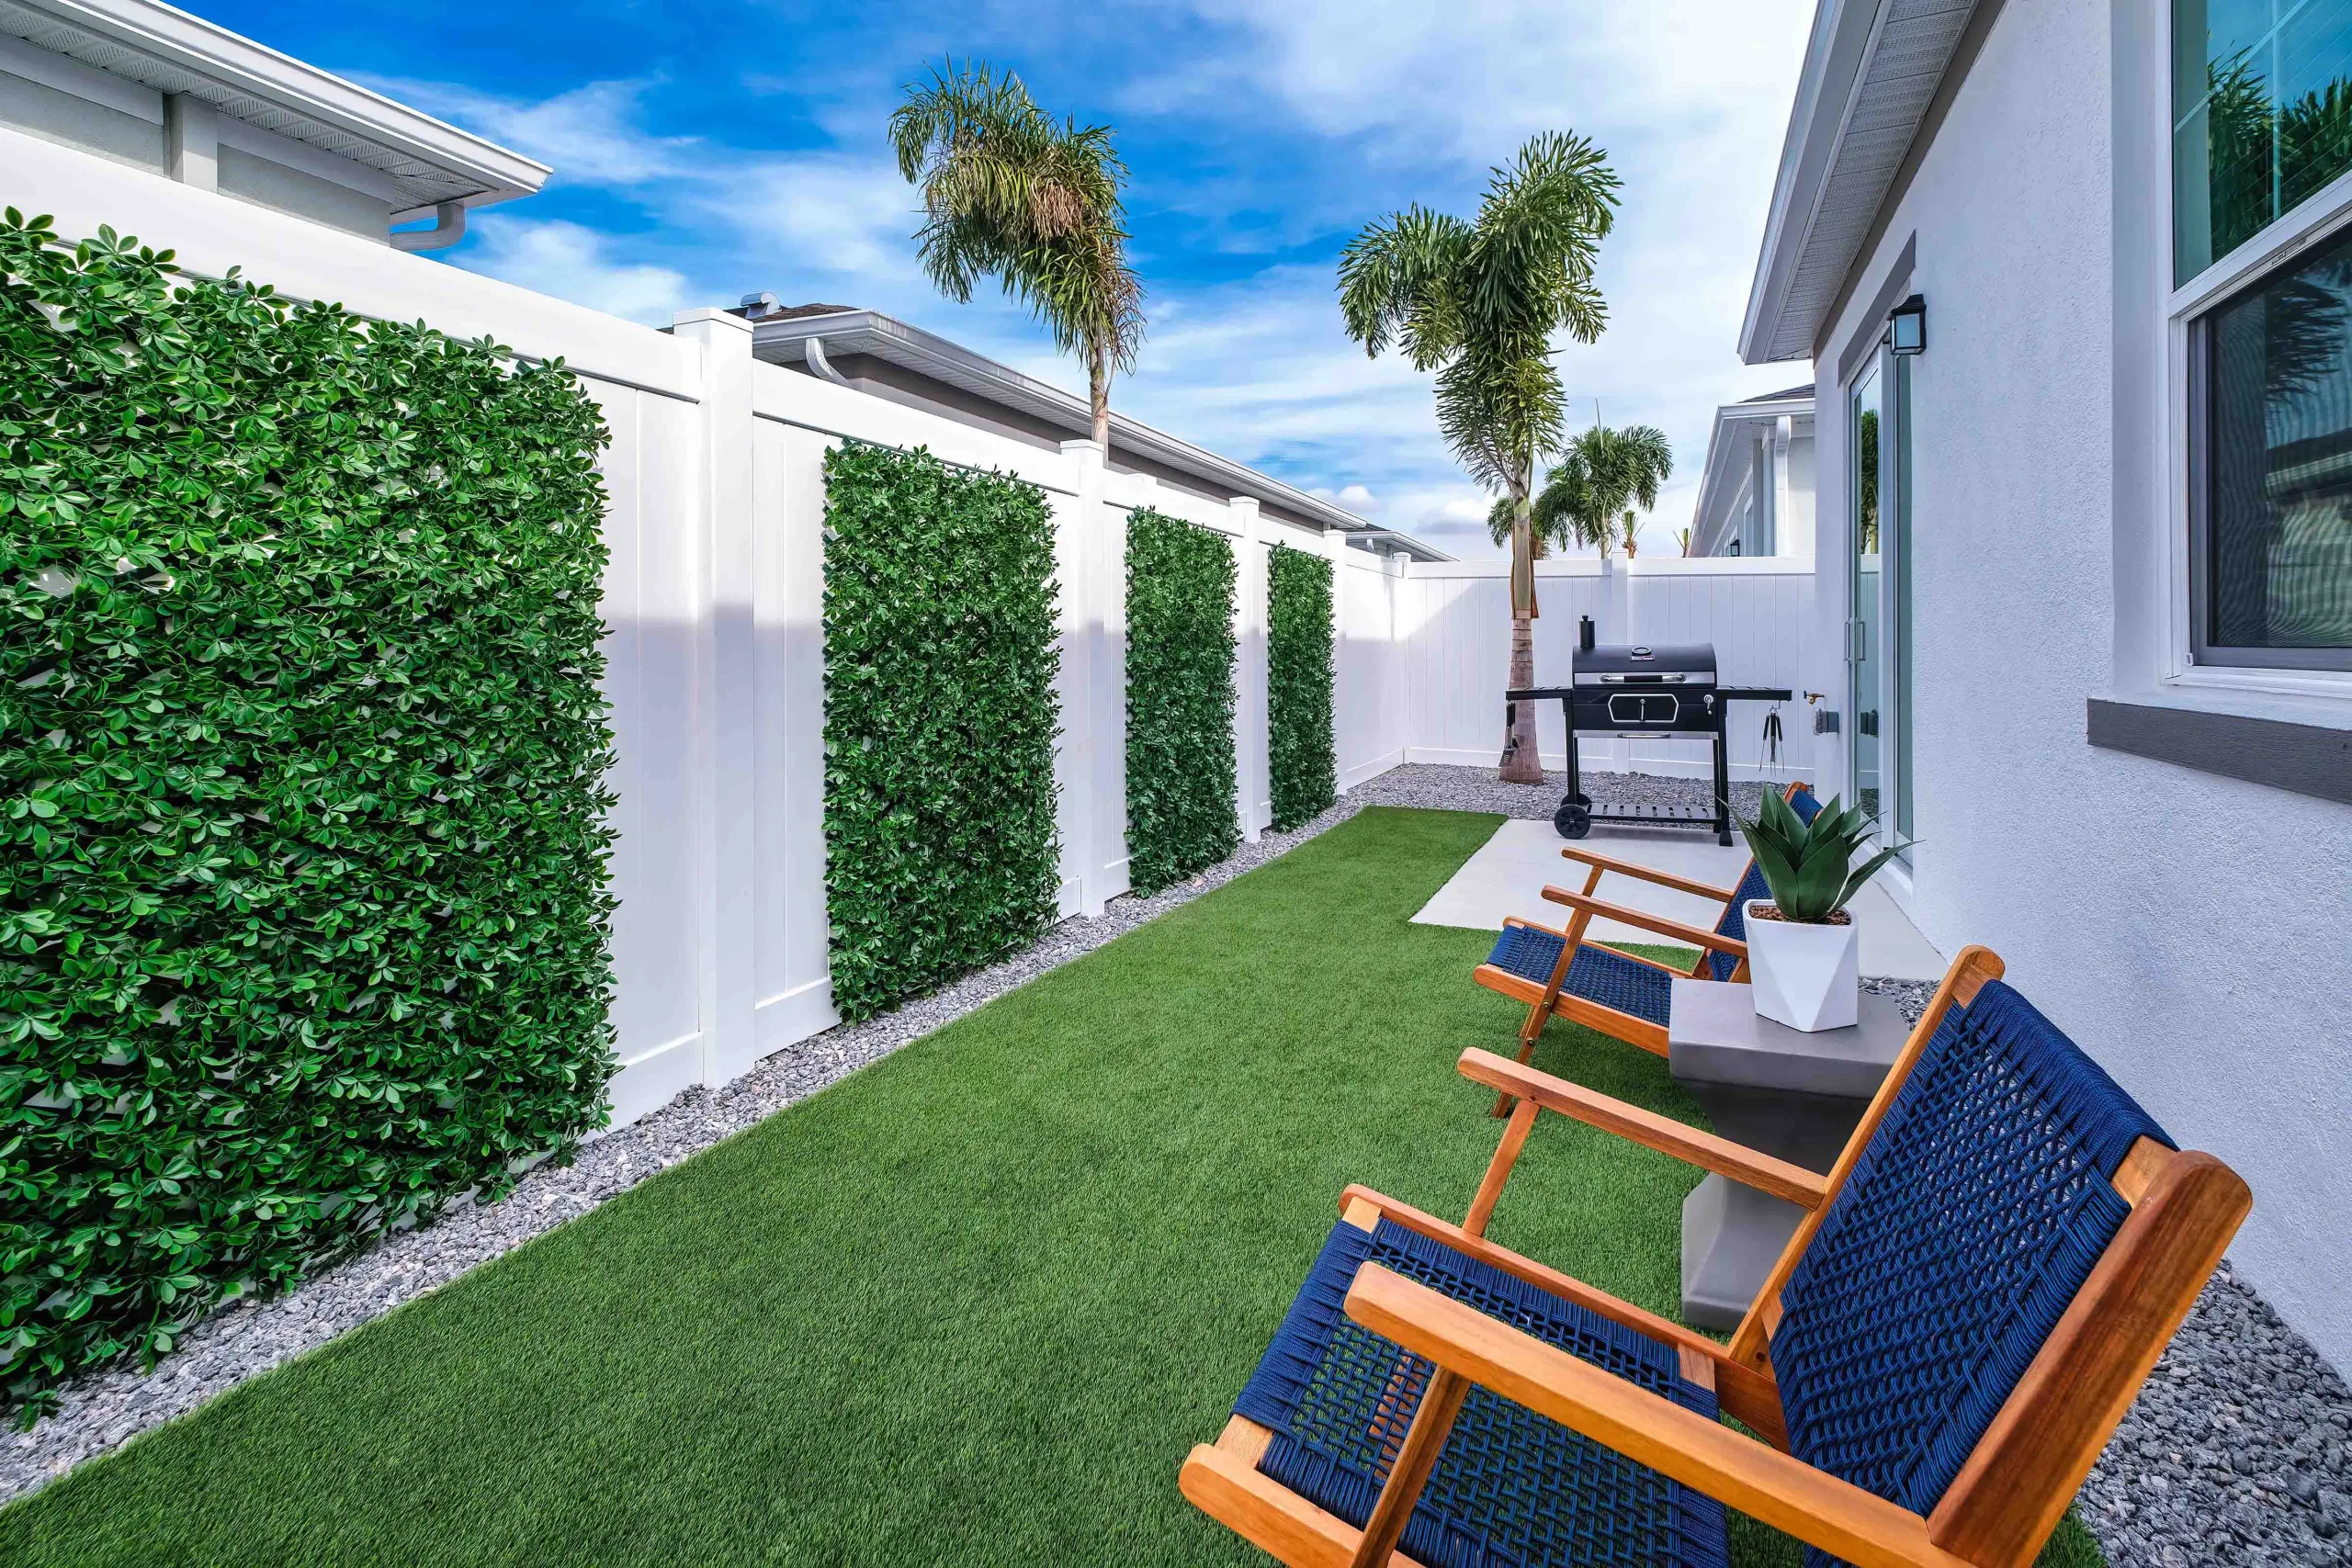 A beautiful Florida backyard scaped with artificial turf, a mature palm tree, seating, a grill, a patio, and a white fence on a beautiful breezy sunny day.